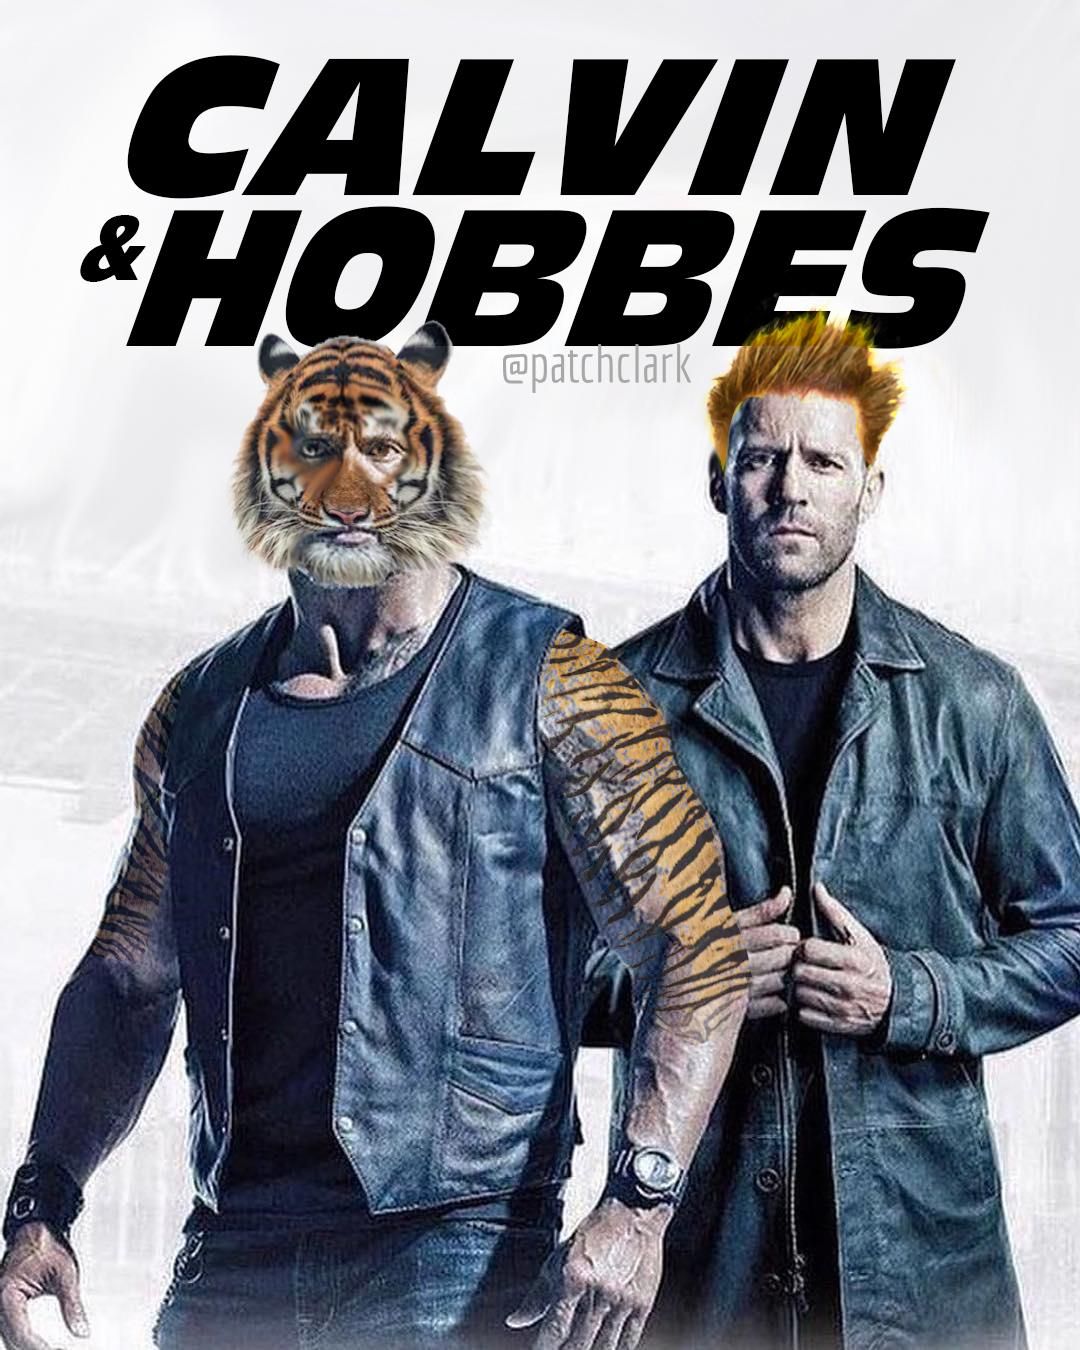 A new poster for Hobbs and Shaw that I made yesterday. Based off someone asking, "Is Hobbs &amp; Shaw about that kid and his stuffed tiger?"